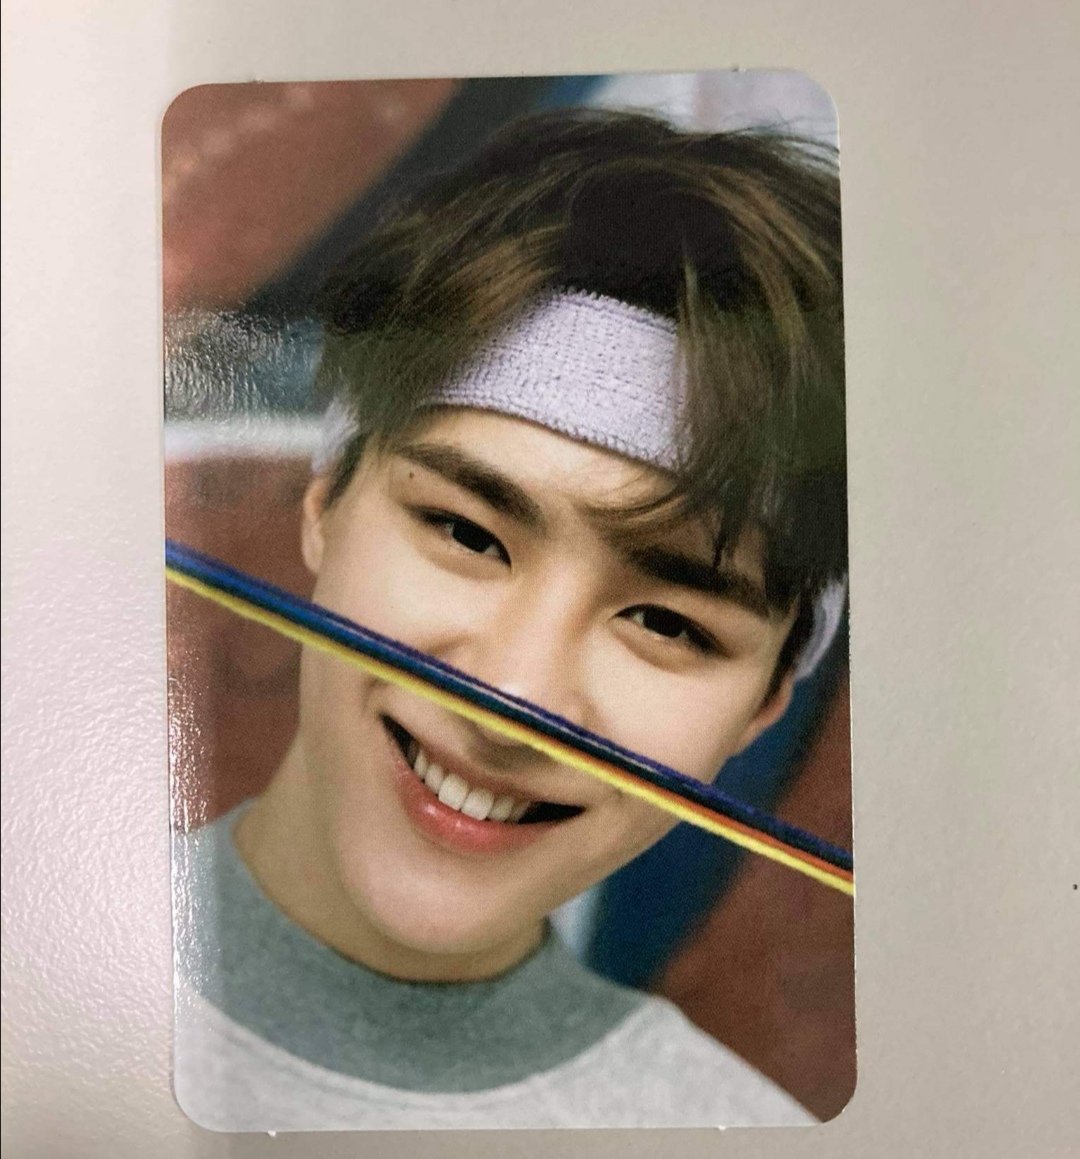  #HFPHOnhand SALENCT 2018 Fan Party: Spring Photocard - Kun - whitr spots at the back, no other issuesP350 + LSFOriginal price: P430Item code: NCTPC1tags: wts lfb ph only onhand